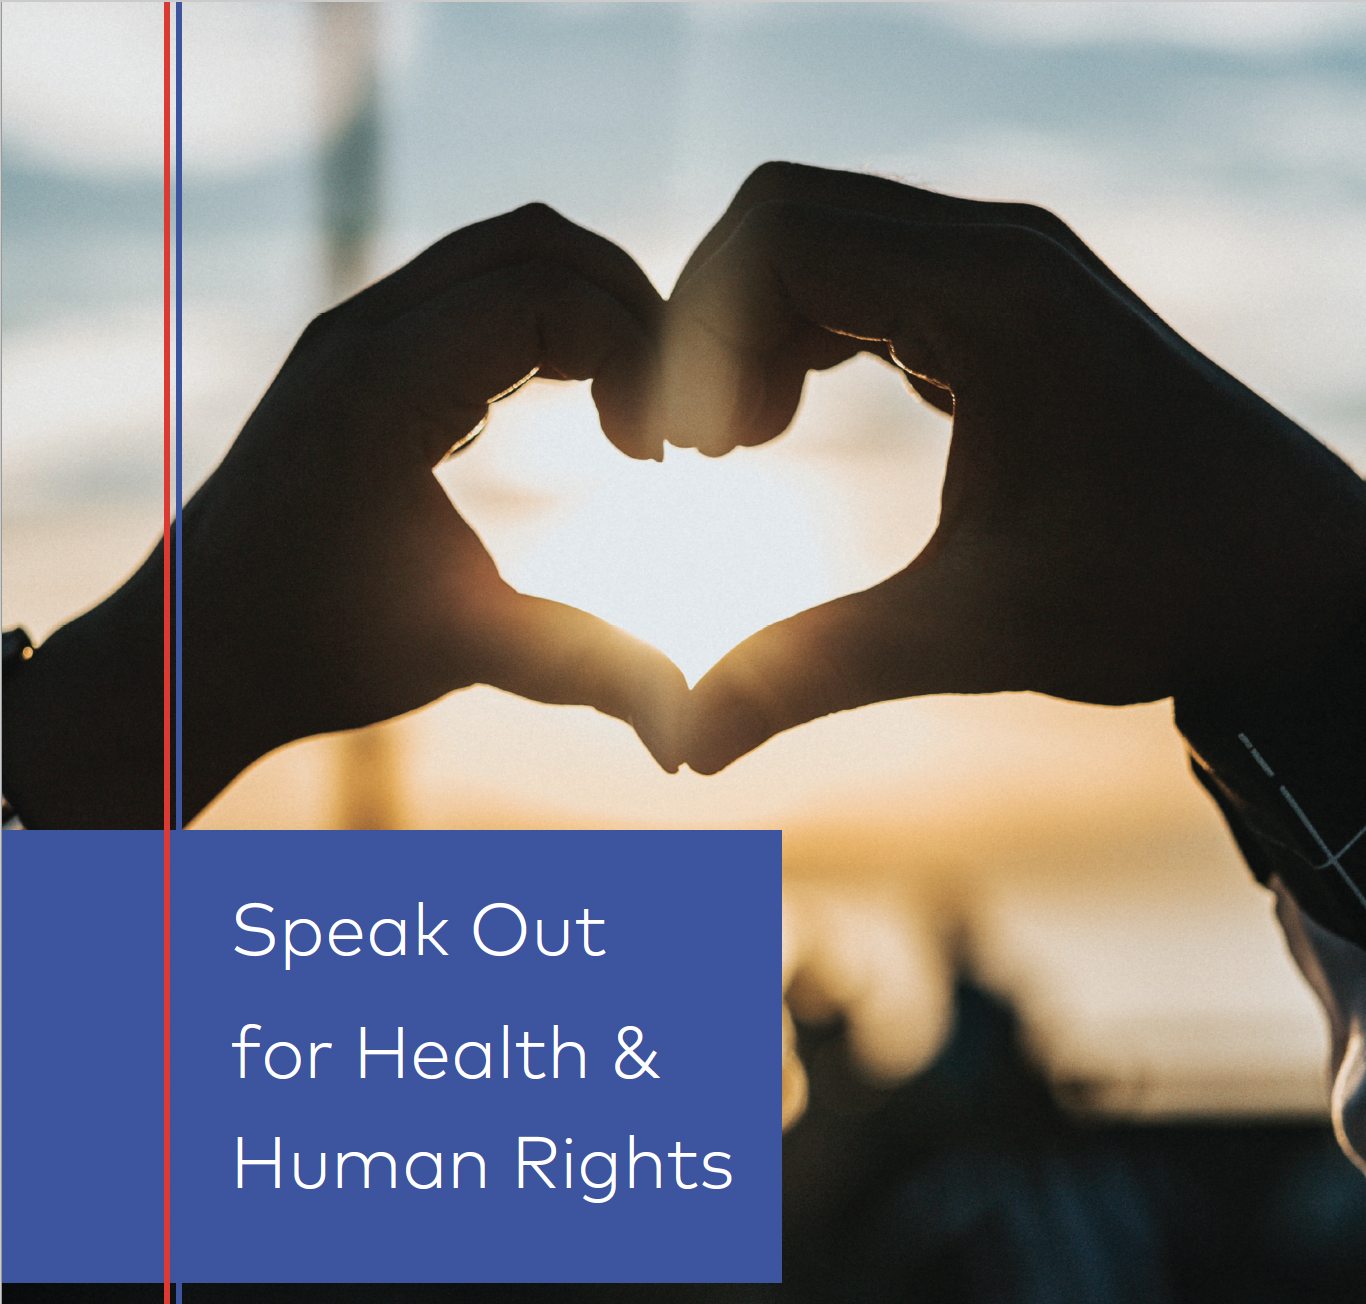 Love Alliance Global Advocacy Strategy: Speak-out for Health & Human Rights